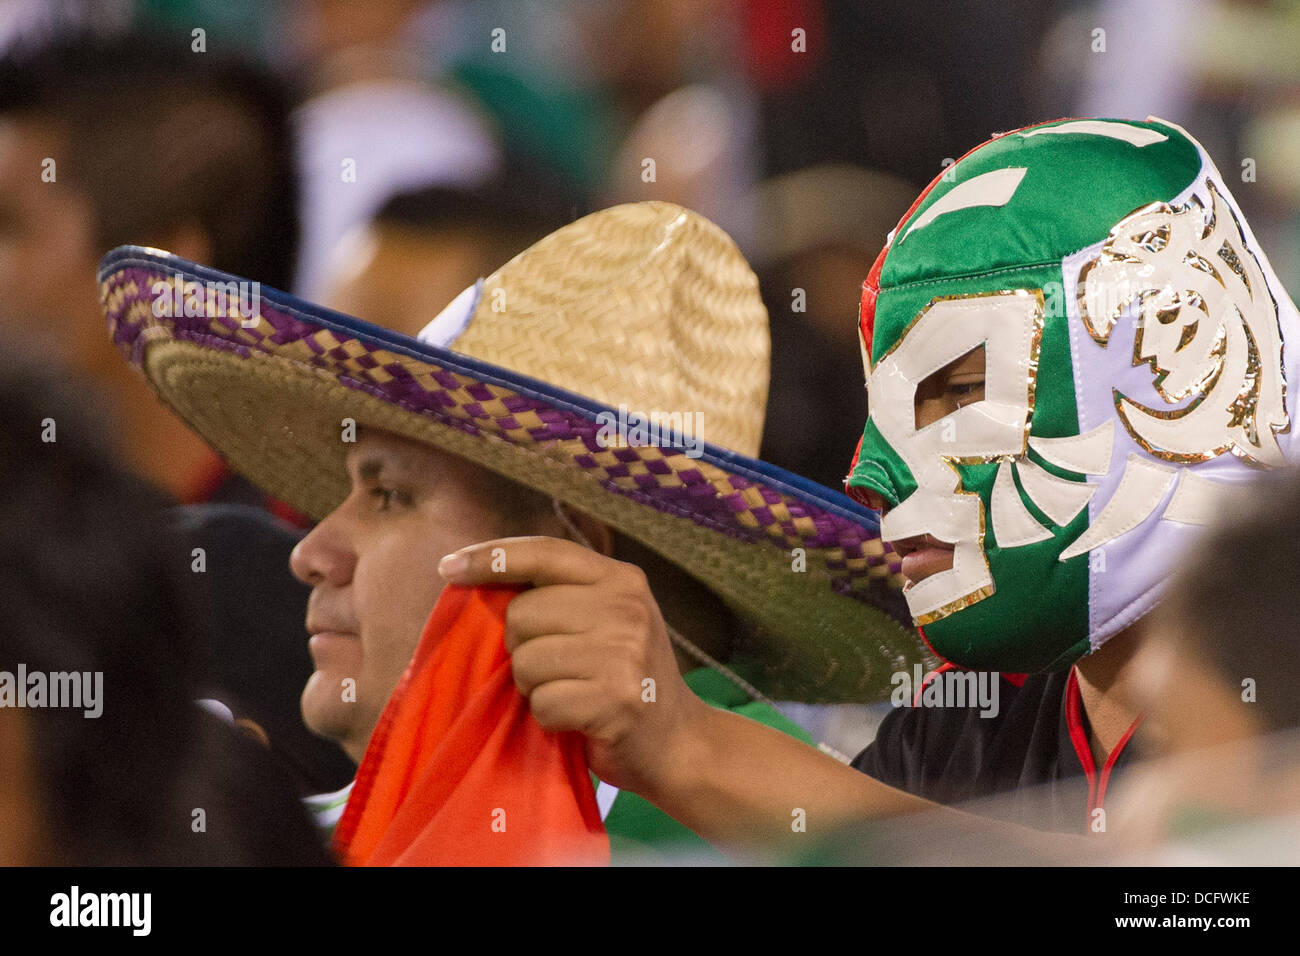 Aug. 14, 2013 - East Rutherford, New Jersey, U.S - August 14, 2013: A man in a sombrero and a man in a Mexican aztec mask look on during the International friendly match between Mexico and Ivory Coast at Met Life Stadium, East Rutherford, NJ. Mexico defeated Ivory Coast 4-1. Stock Photo